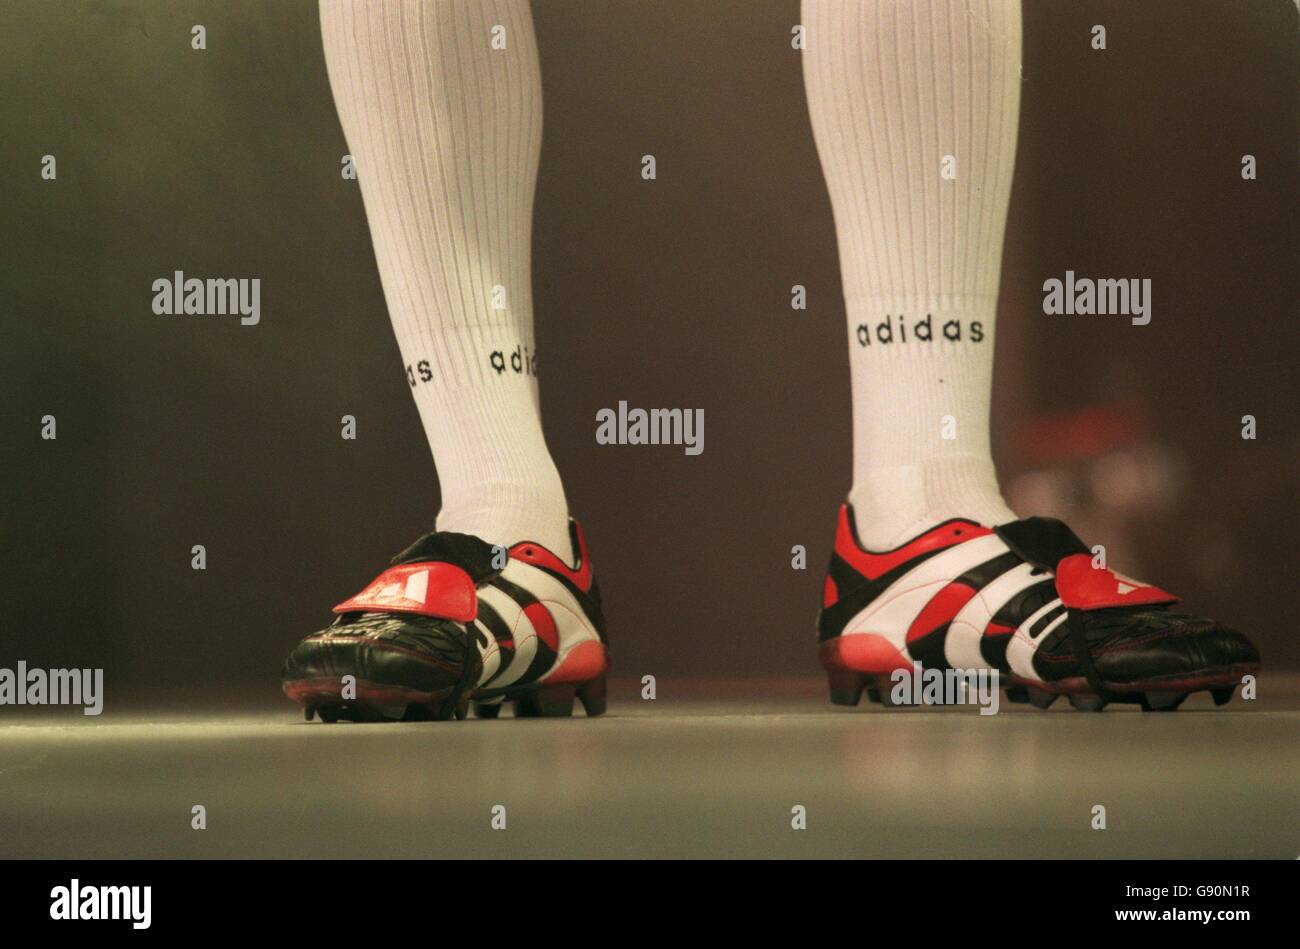 Soccer - David Beckham Signs a Boot Contract With Adidas. David Beckham of  Manchester United at the launch of his new Adidas boot deal Stock Photo -  Alamy